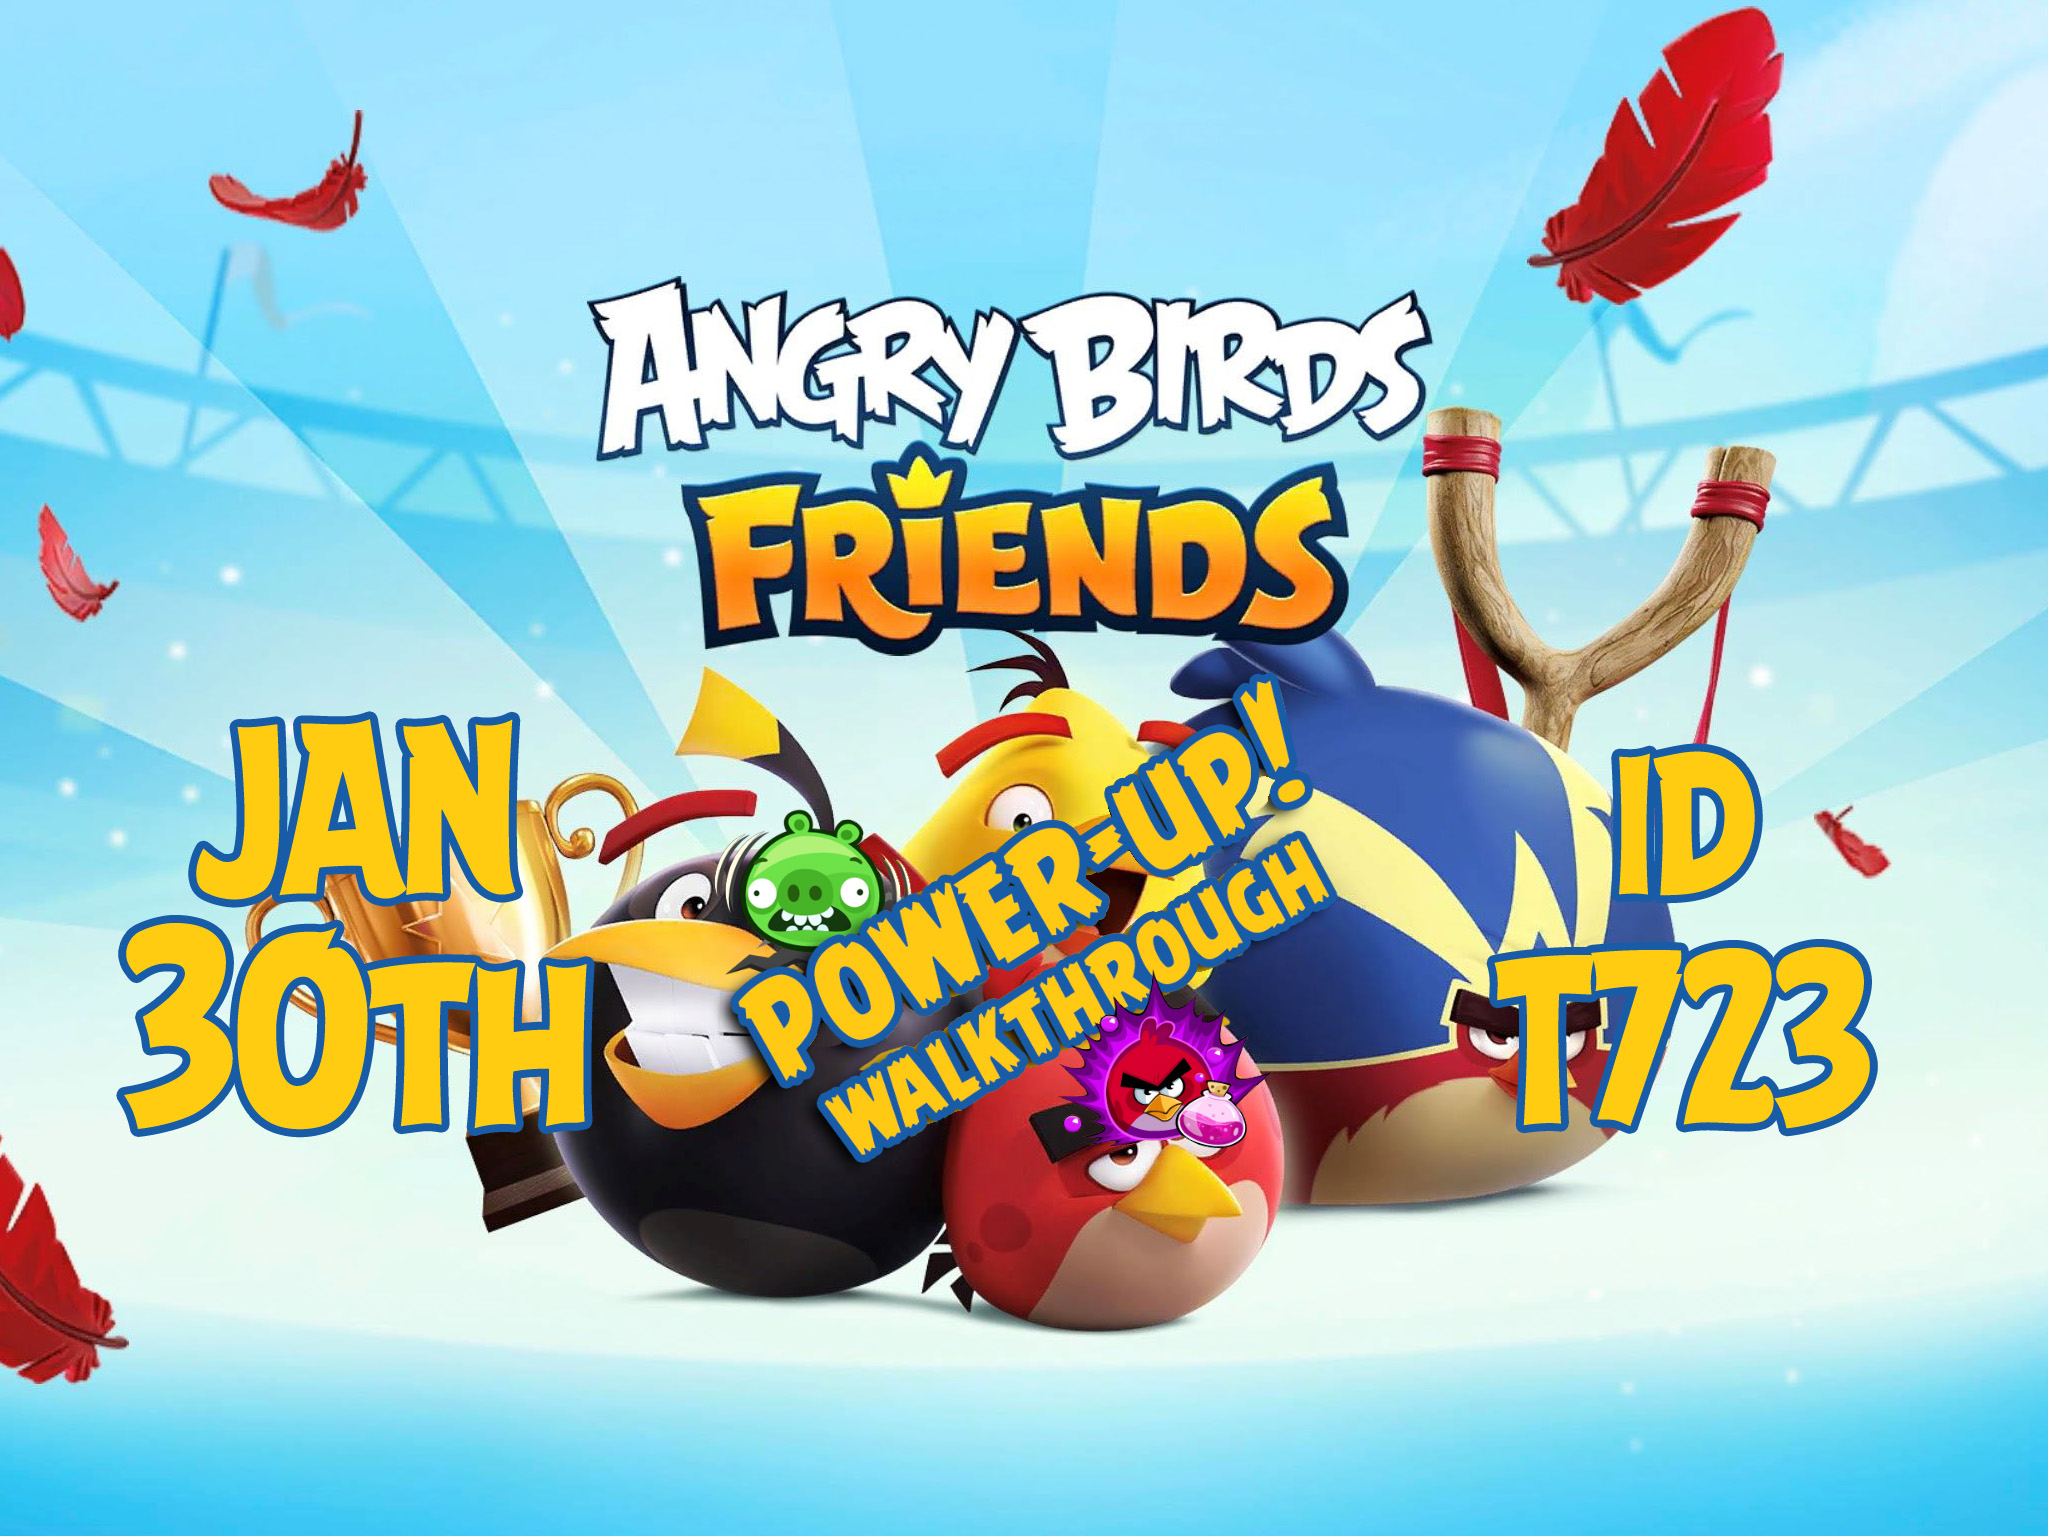 Angry-Birds-Friends-Tournament-T723-Feature-Image-PU